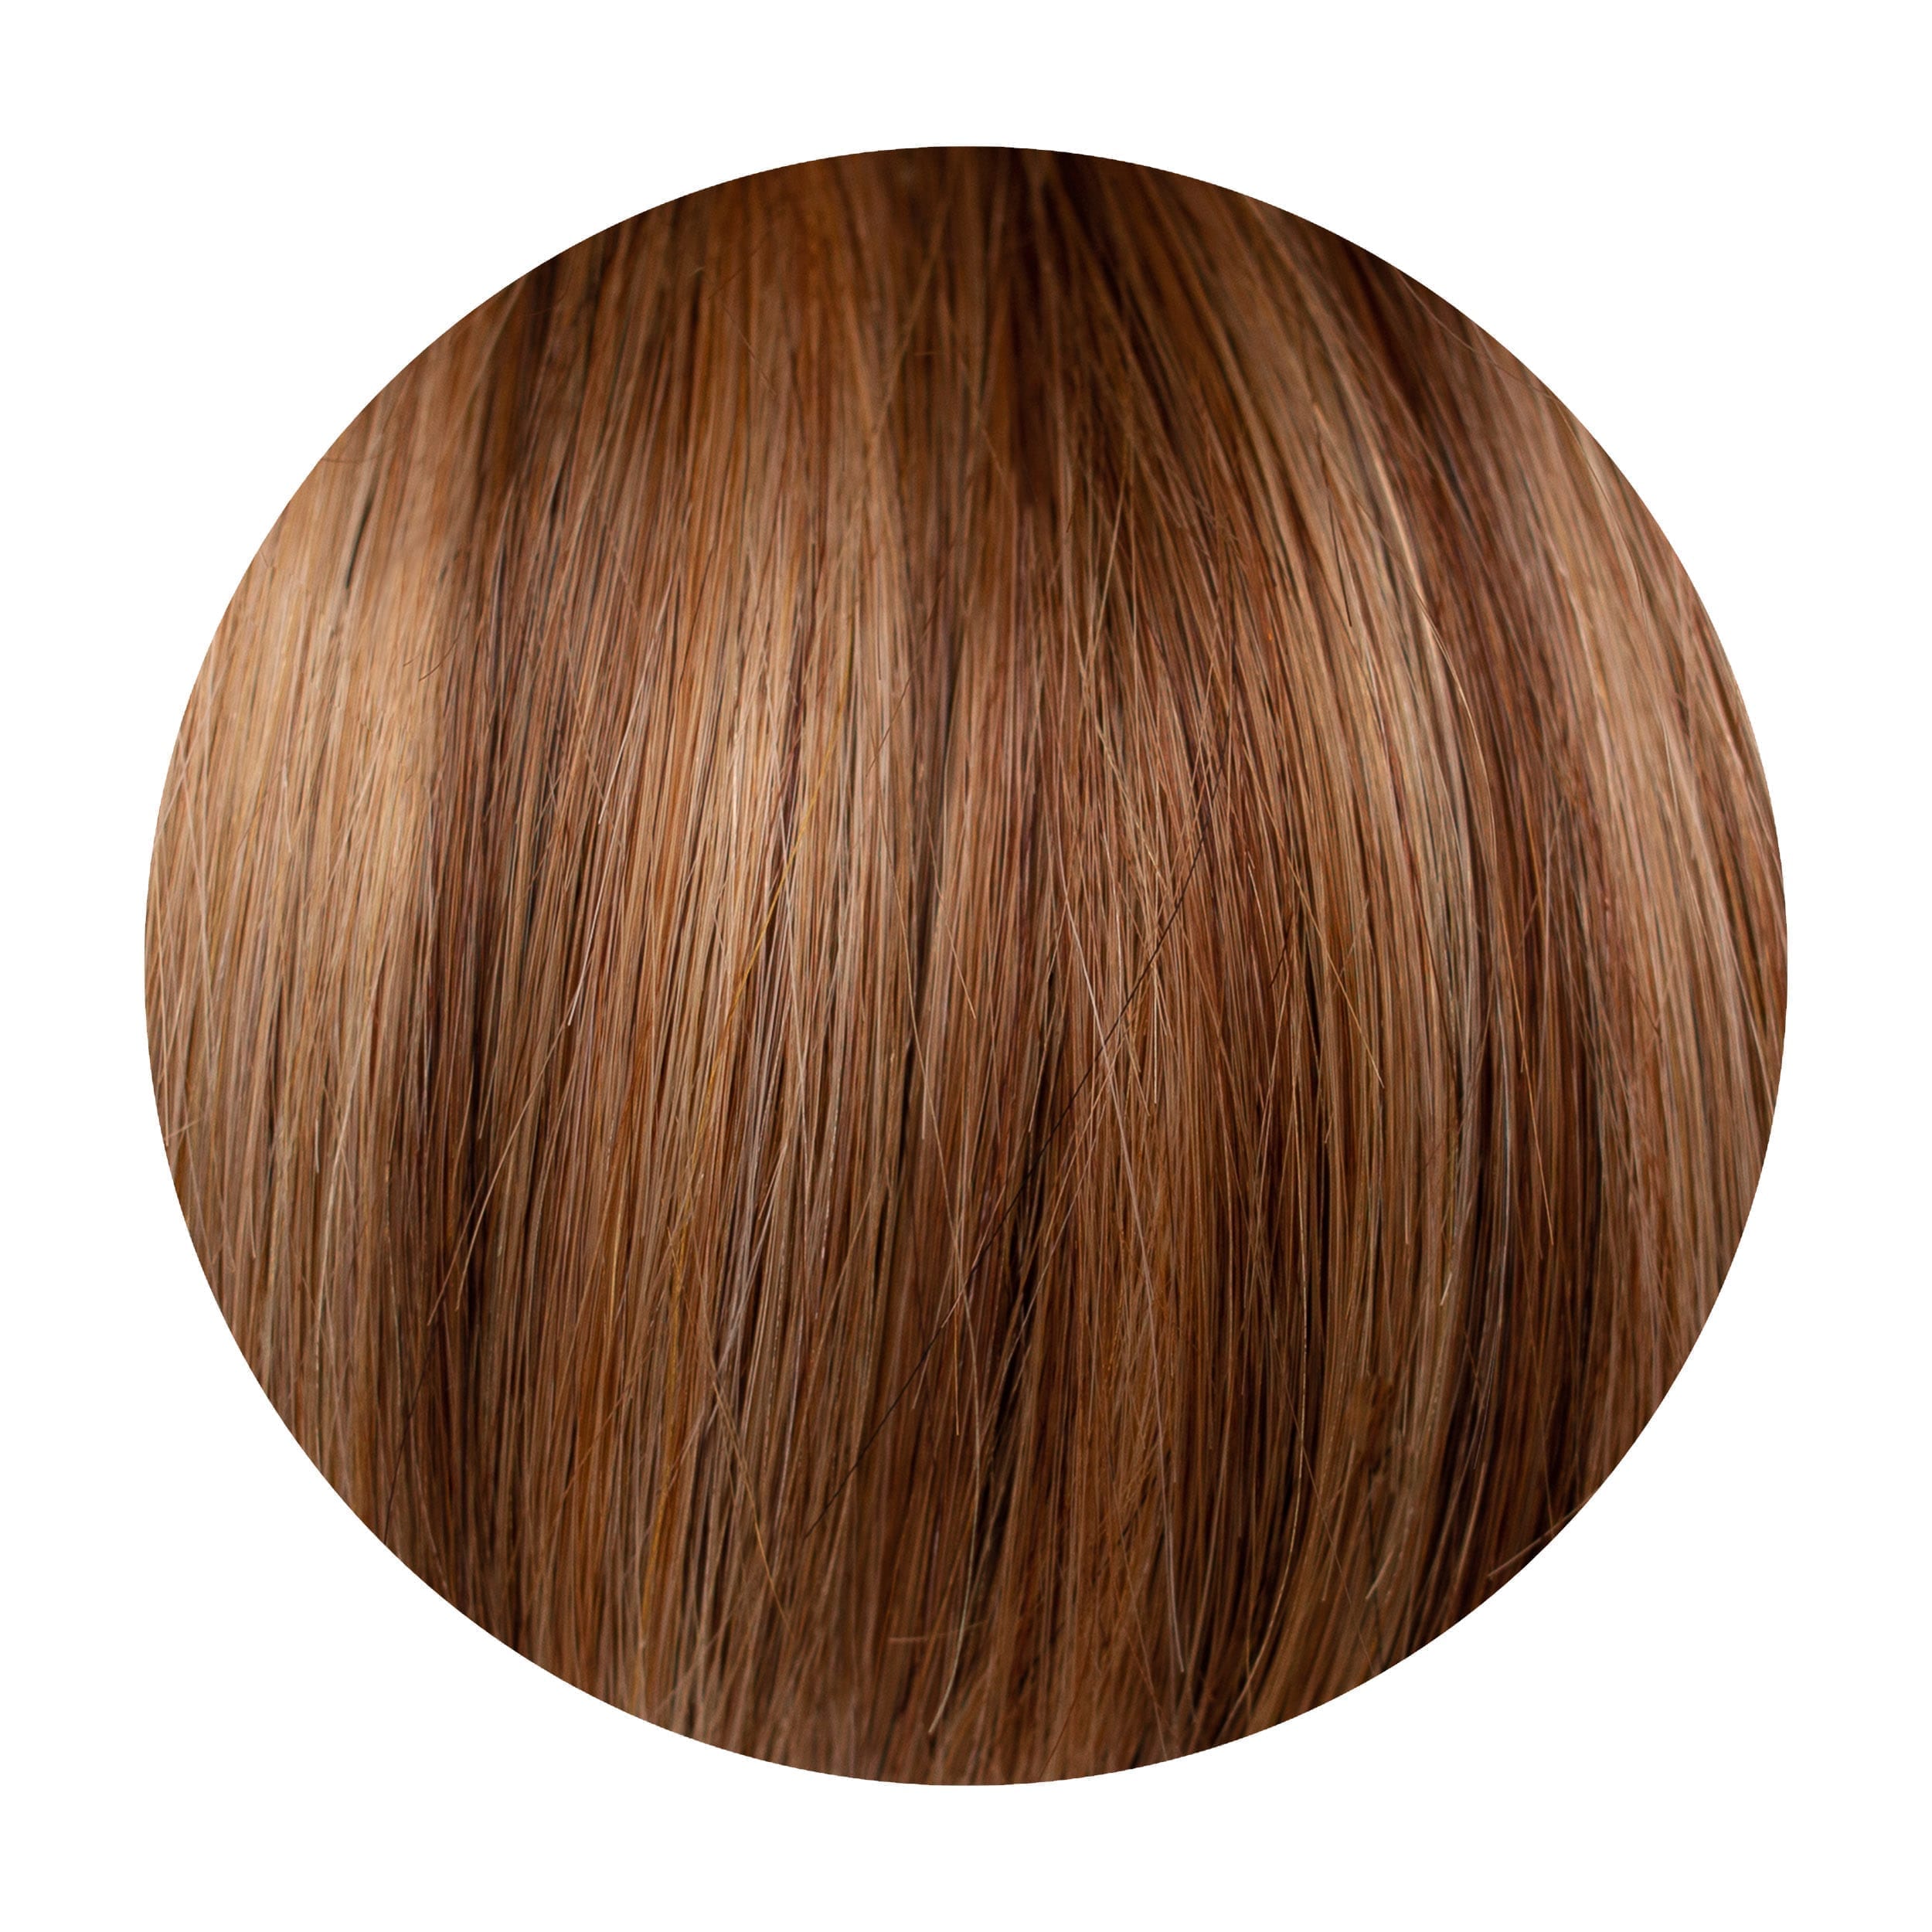 Caramel Blend Piano Colour Human Hair Extensions Clip in 5 Piece